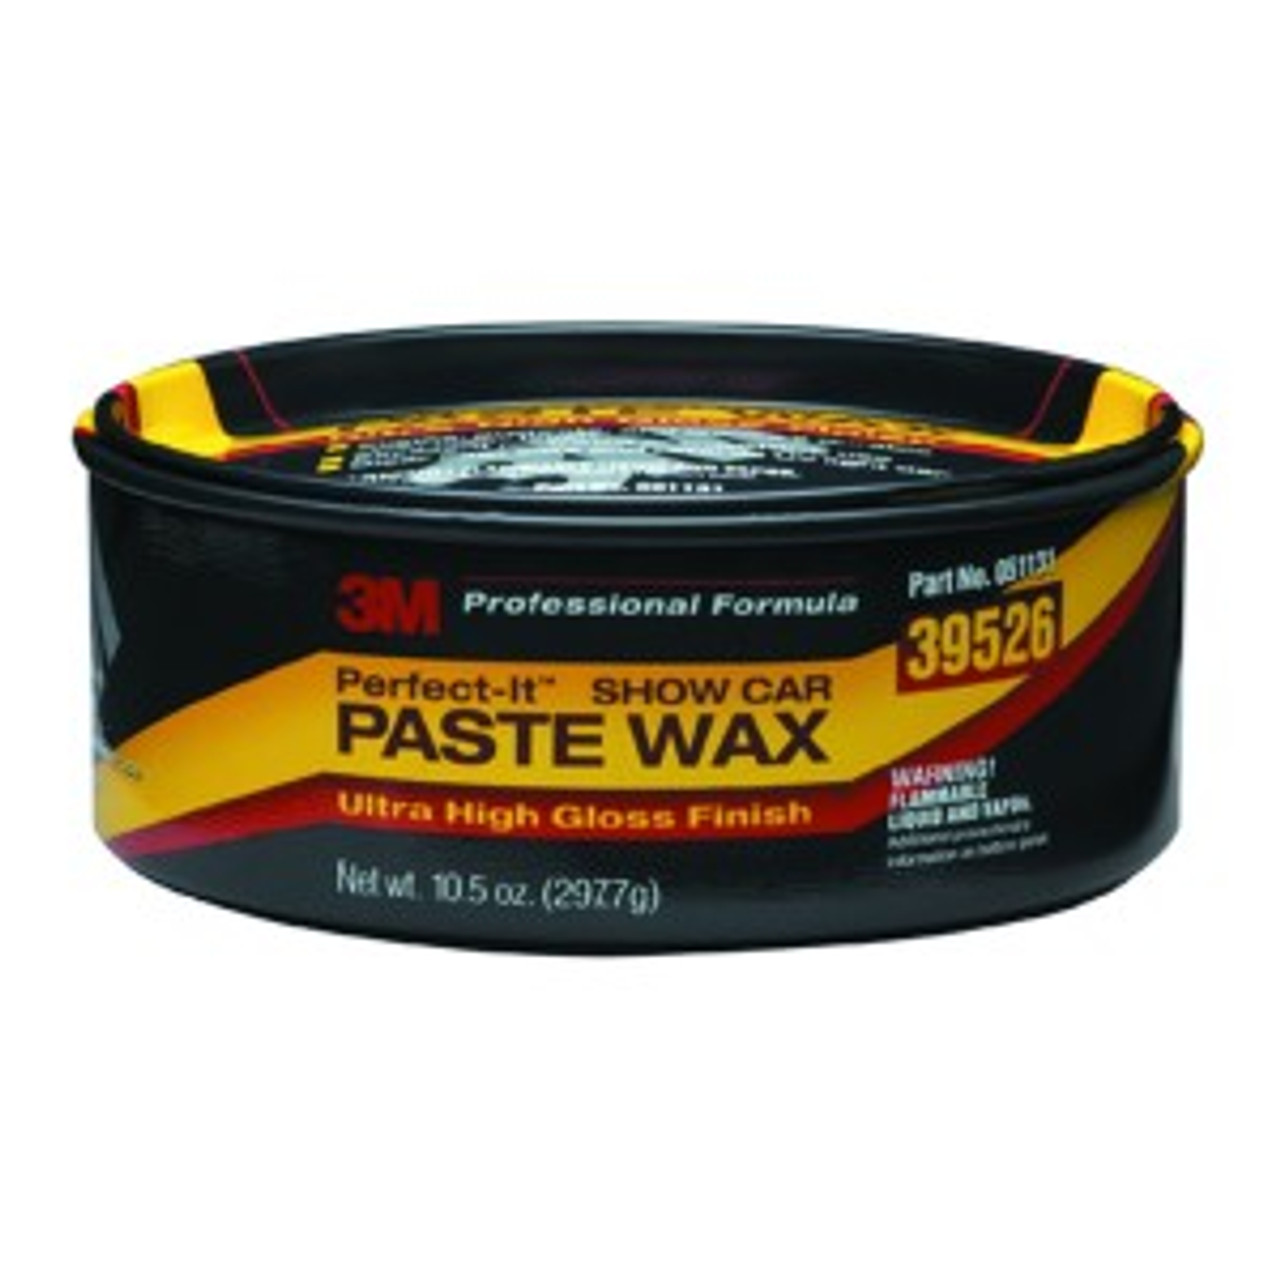 PERFECT-IT SHOW CAR PASTE WAX, 10.5 OUNCE; 39526